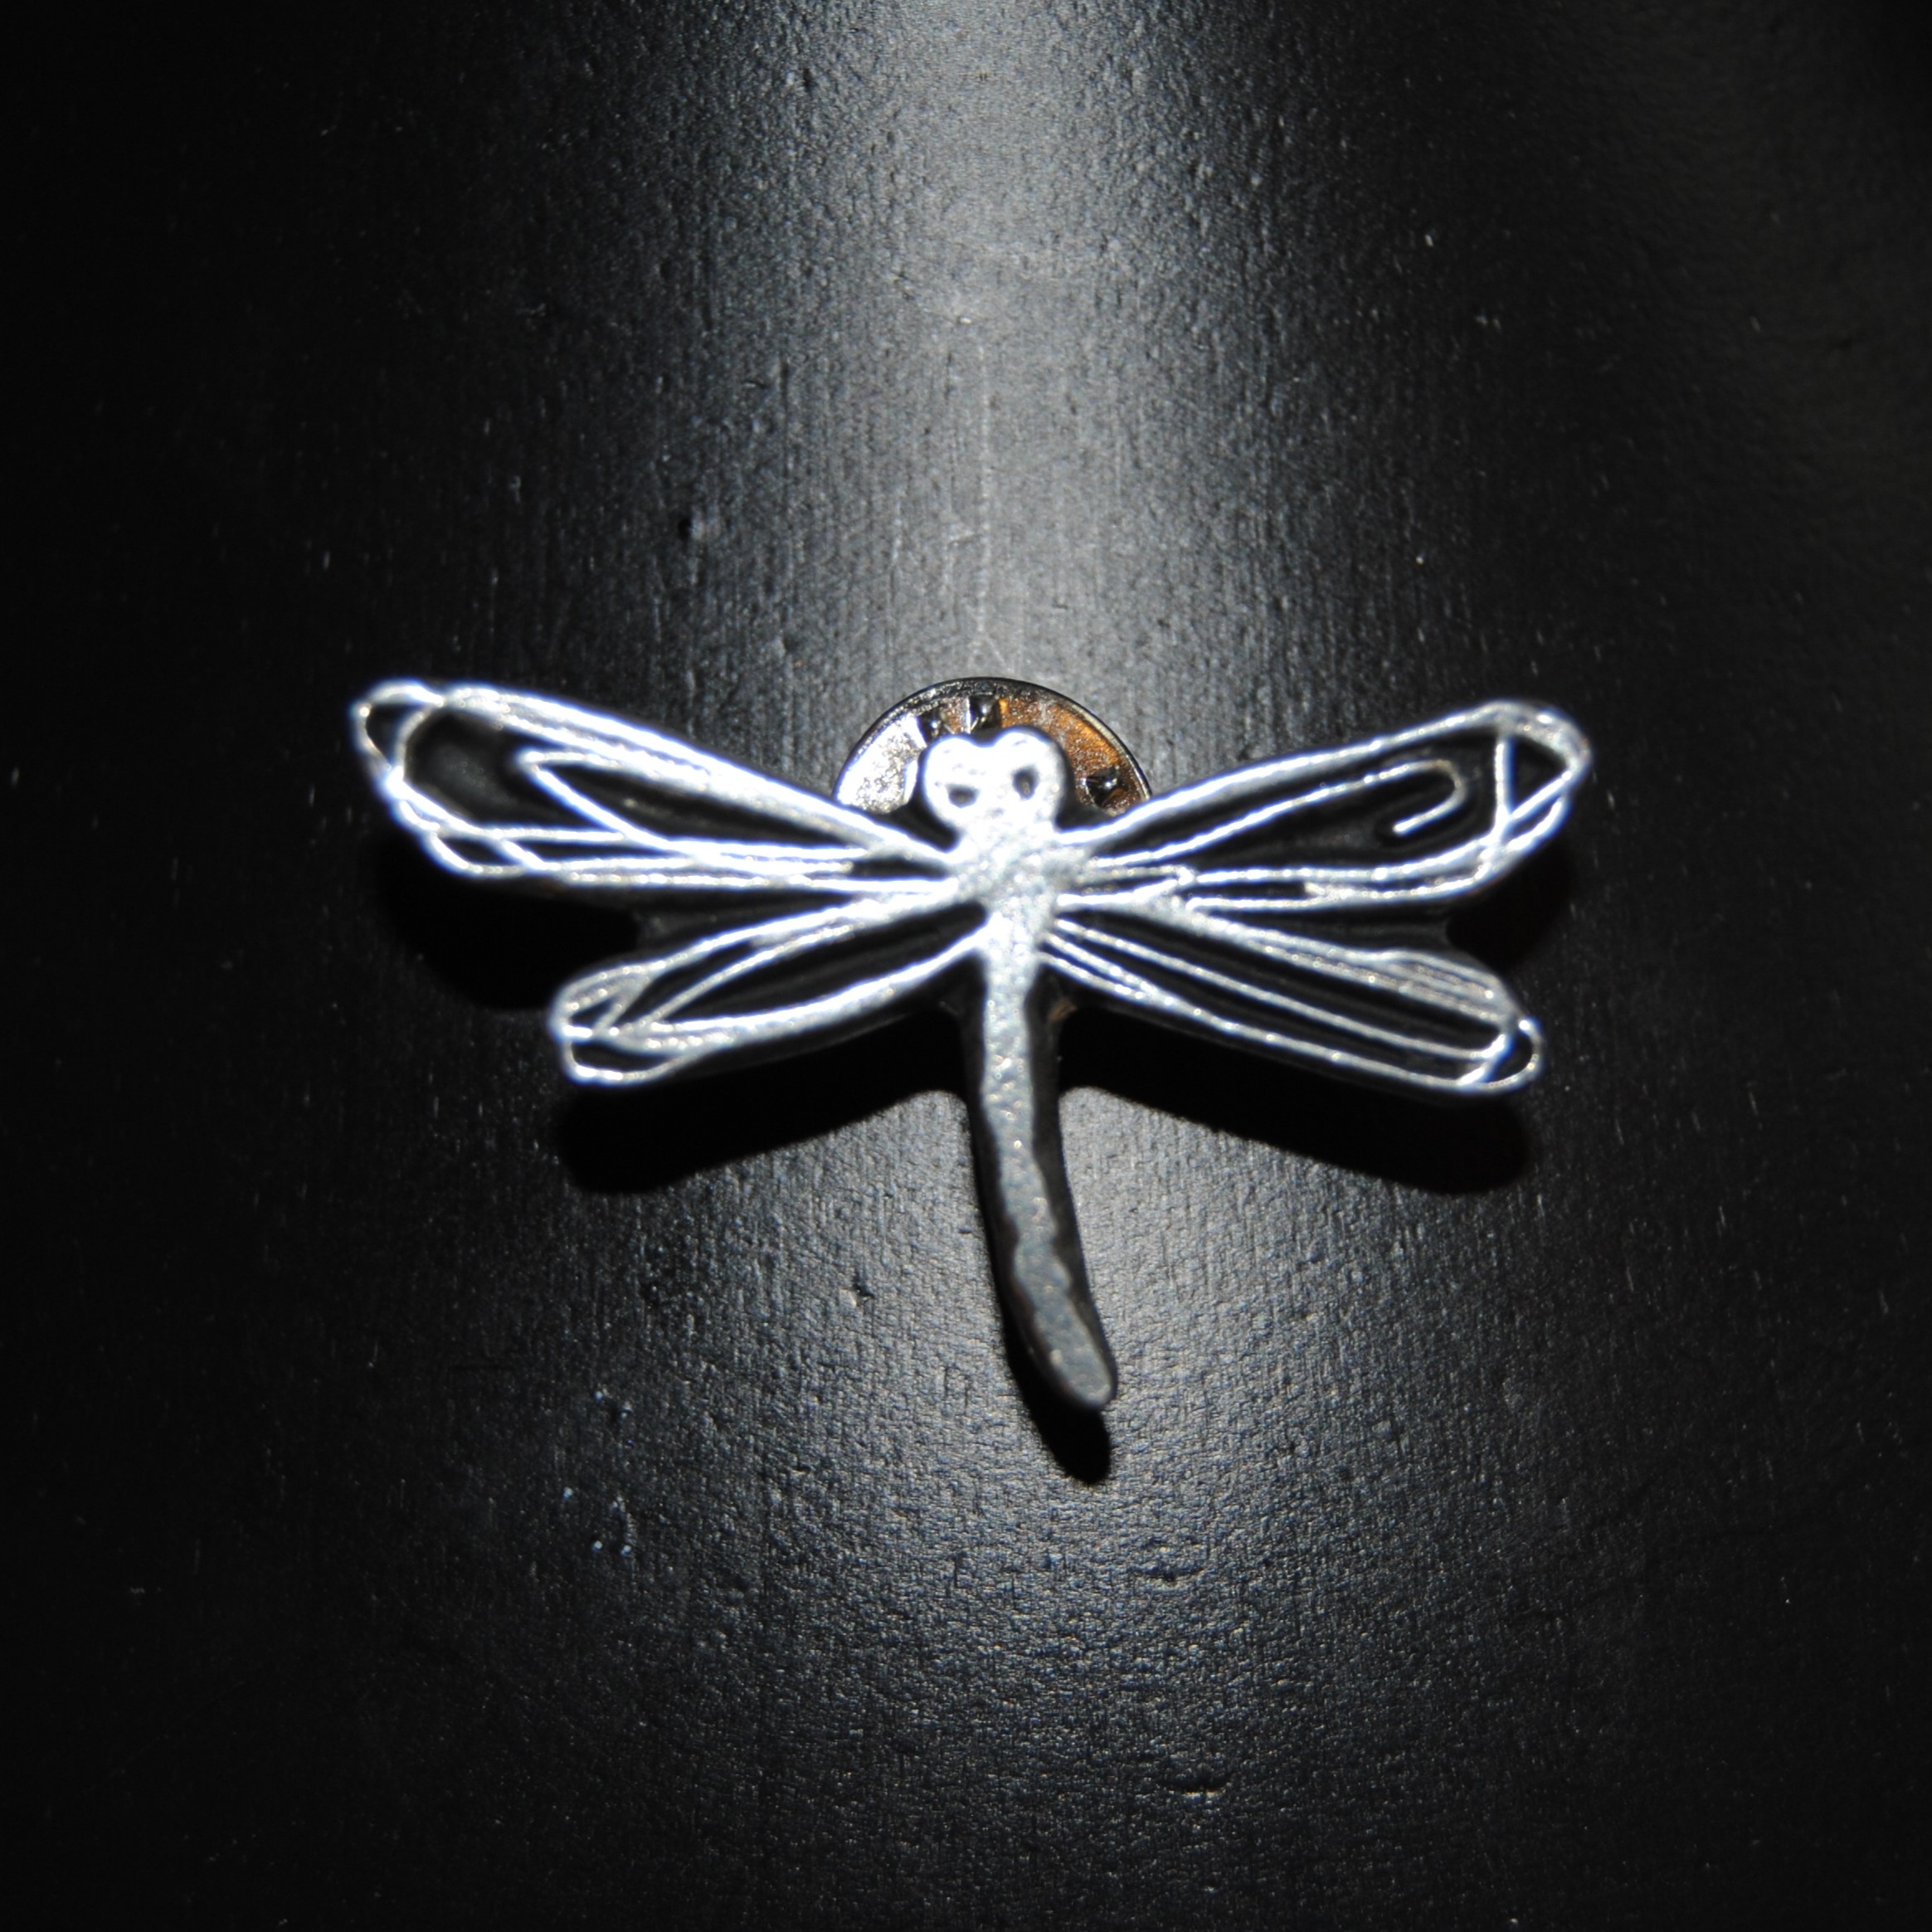 Pewter - Sml Dragonfly Brooch